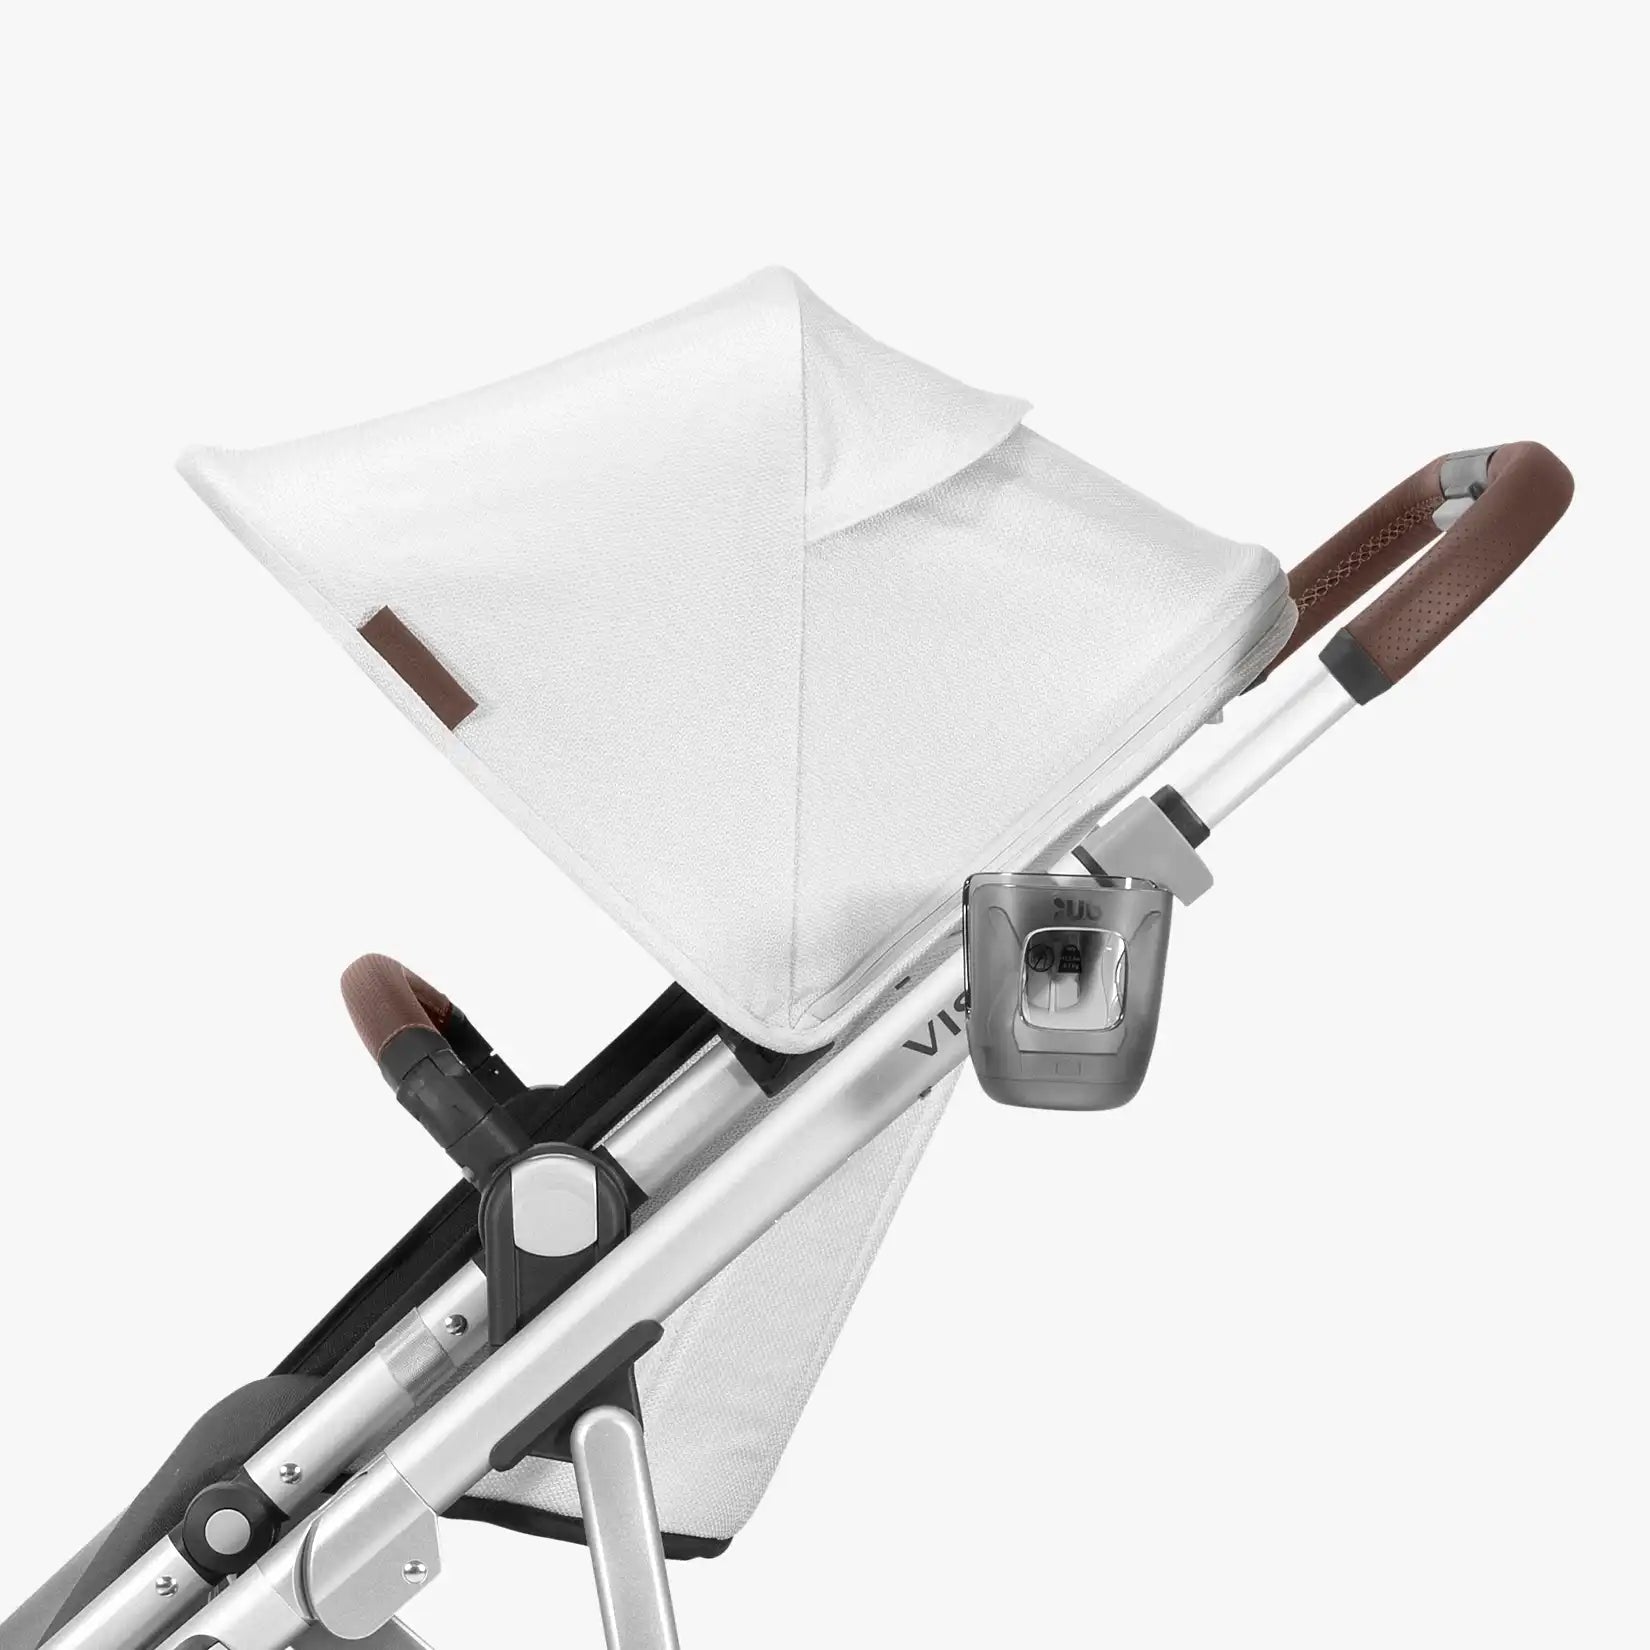 UPPAbaby Cup Holder - ANB Baby -817609018806$20 - $50